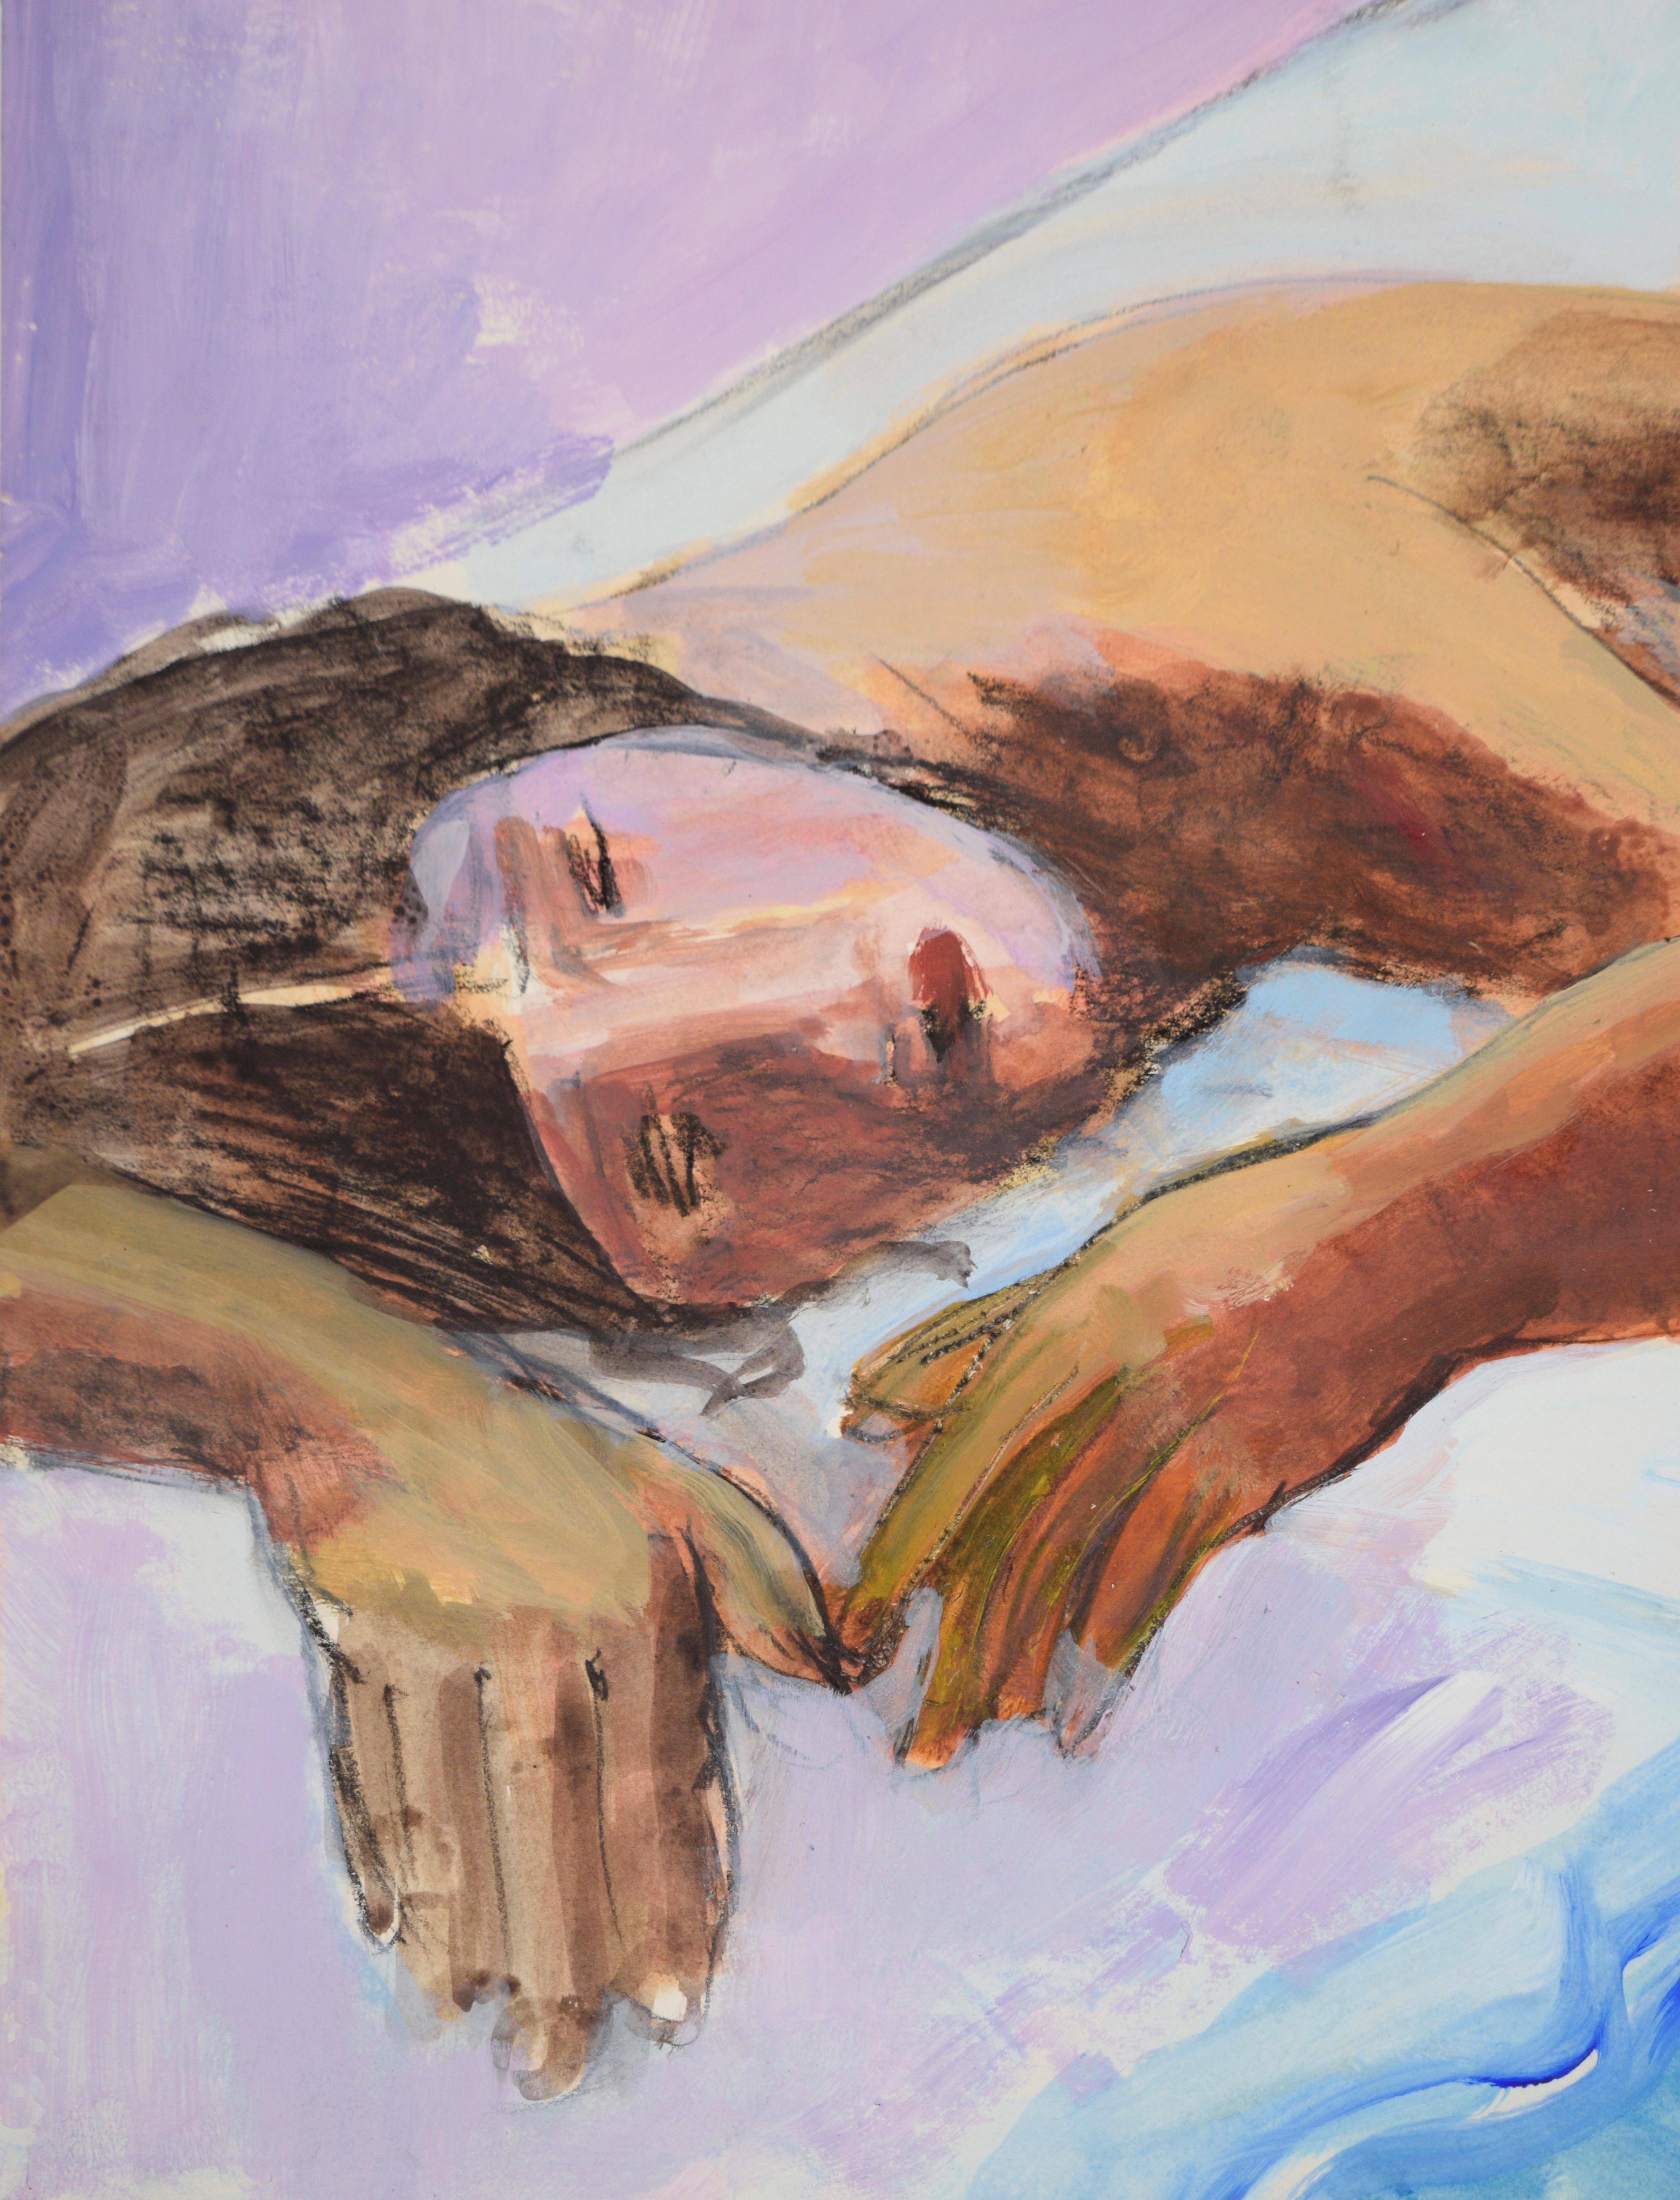 Vintage Figurative Nude Study Posed On Bed - Acrylic On Paper - Contemporary Painting by Katherine Kallick